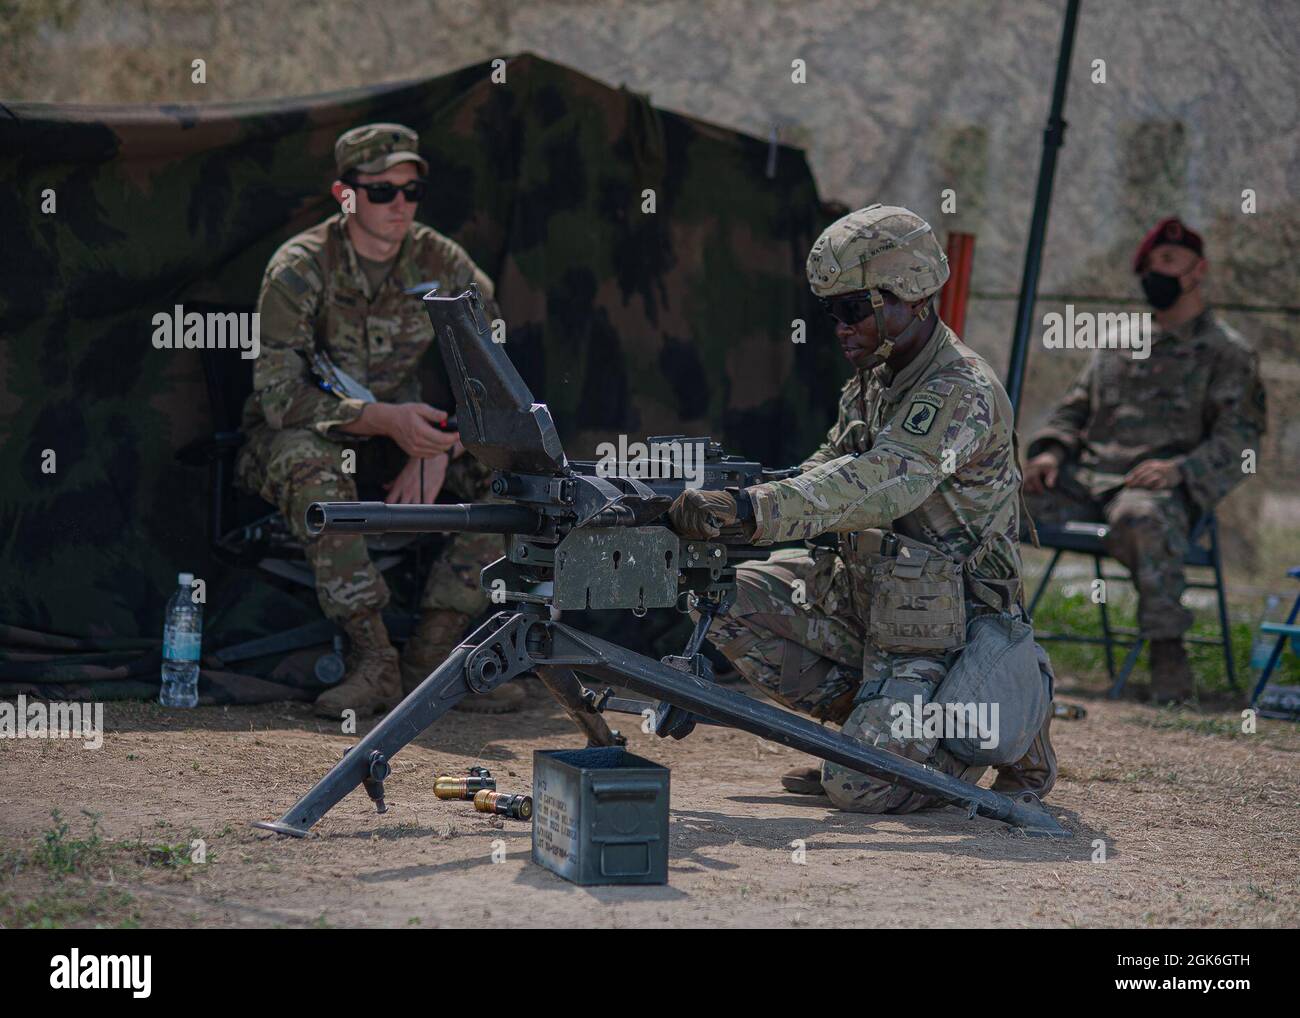 A U.S. Army paratrooper assigned to the 173rd Airborne Brigade executes a functions check on an MK19 Grenade Launcher during Expert Infantryman Badge (EIB) / Expert Soldier Badge (ESB) testing on August, 15 2021 at Caserma Del Din, Italy. Earning the coveted EIB and ESB displays Soldiers' proficiency in their specialty and sets them apart from their peers.    The 173rd Airborne Brigade is the U.S. Army’s Contingency Response Force in Europe, providing rapidly deployable forces to the United States European, Africa and Central Command areas of responsibility. Forward deployable across Italy and Stock Photo